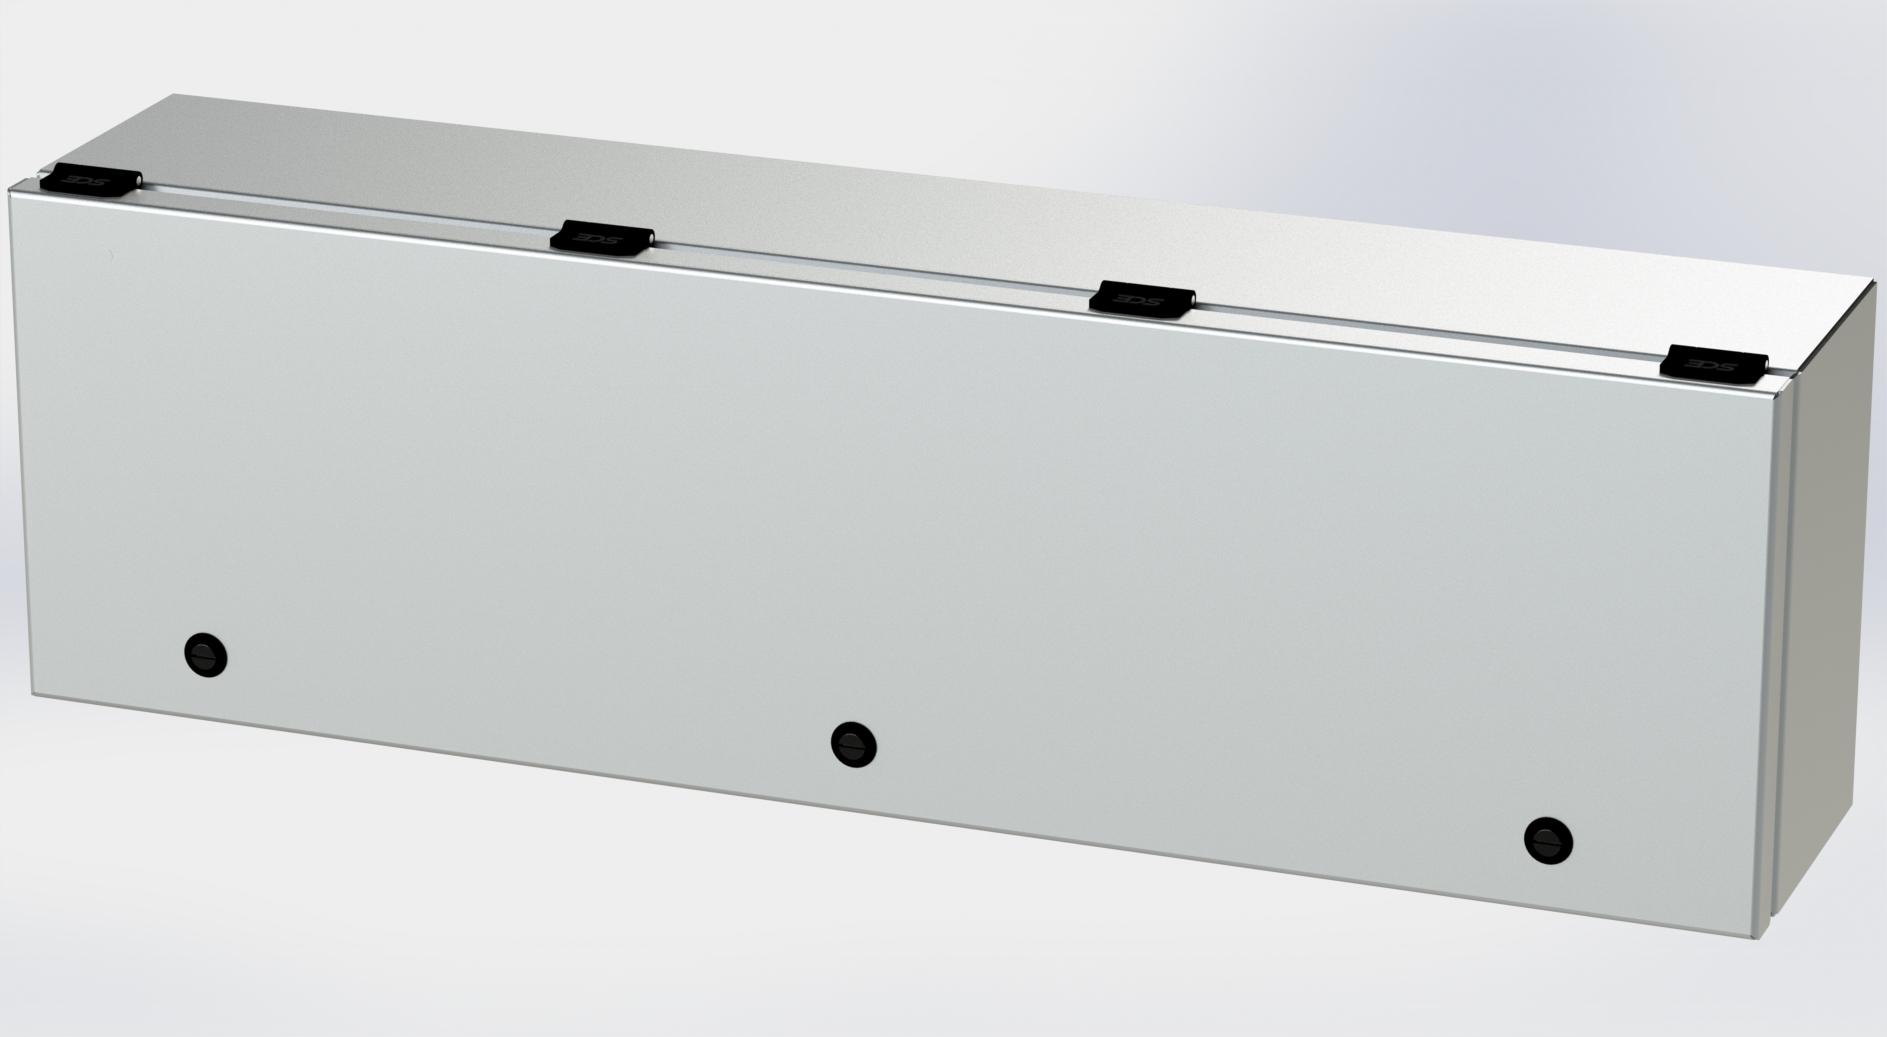 Saginaw Control SCE-L9306ELJSS S.S. ELJ Trough Enclosure, Height:9.00", Width:30.00", Depth:6.00", #4 brushed finish on all exterior surfaces. Optional sub-panels are powder coated white.